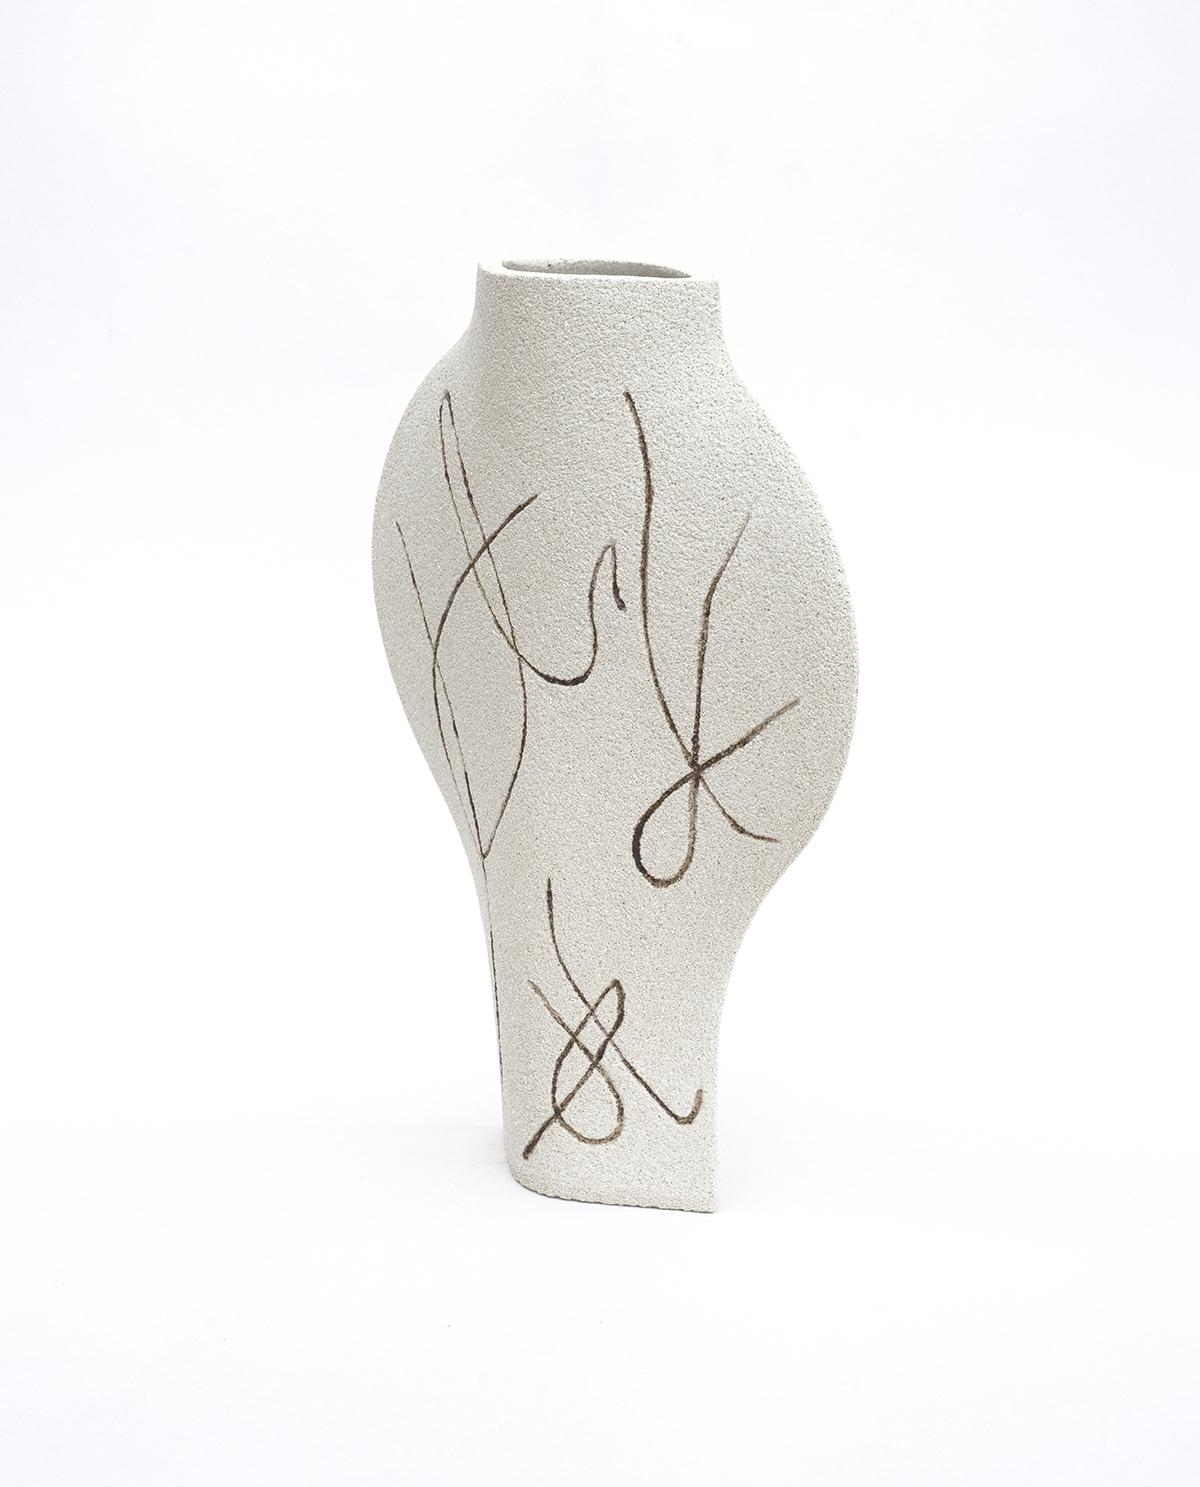 Minimalist 21st Century ‘Dal Lines’, in White Ceramic, Hand-Crafted in France For Sale